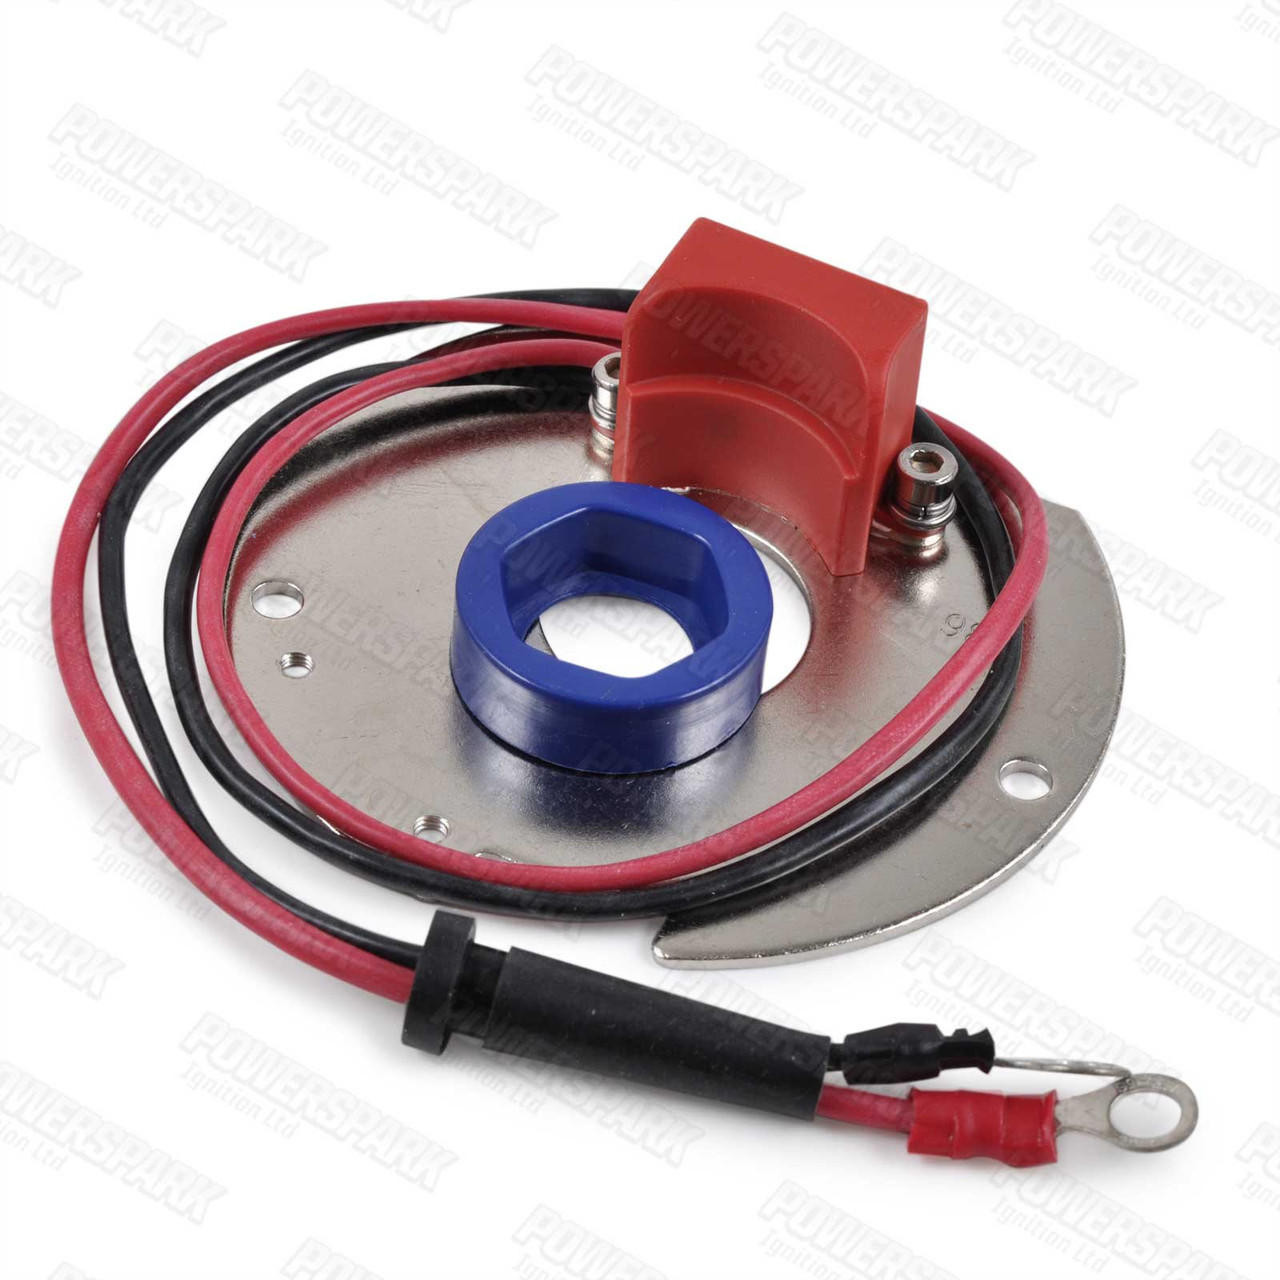  Powerspark Electronic Ignition Kit for Lucas DX6A Distributor (K36)